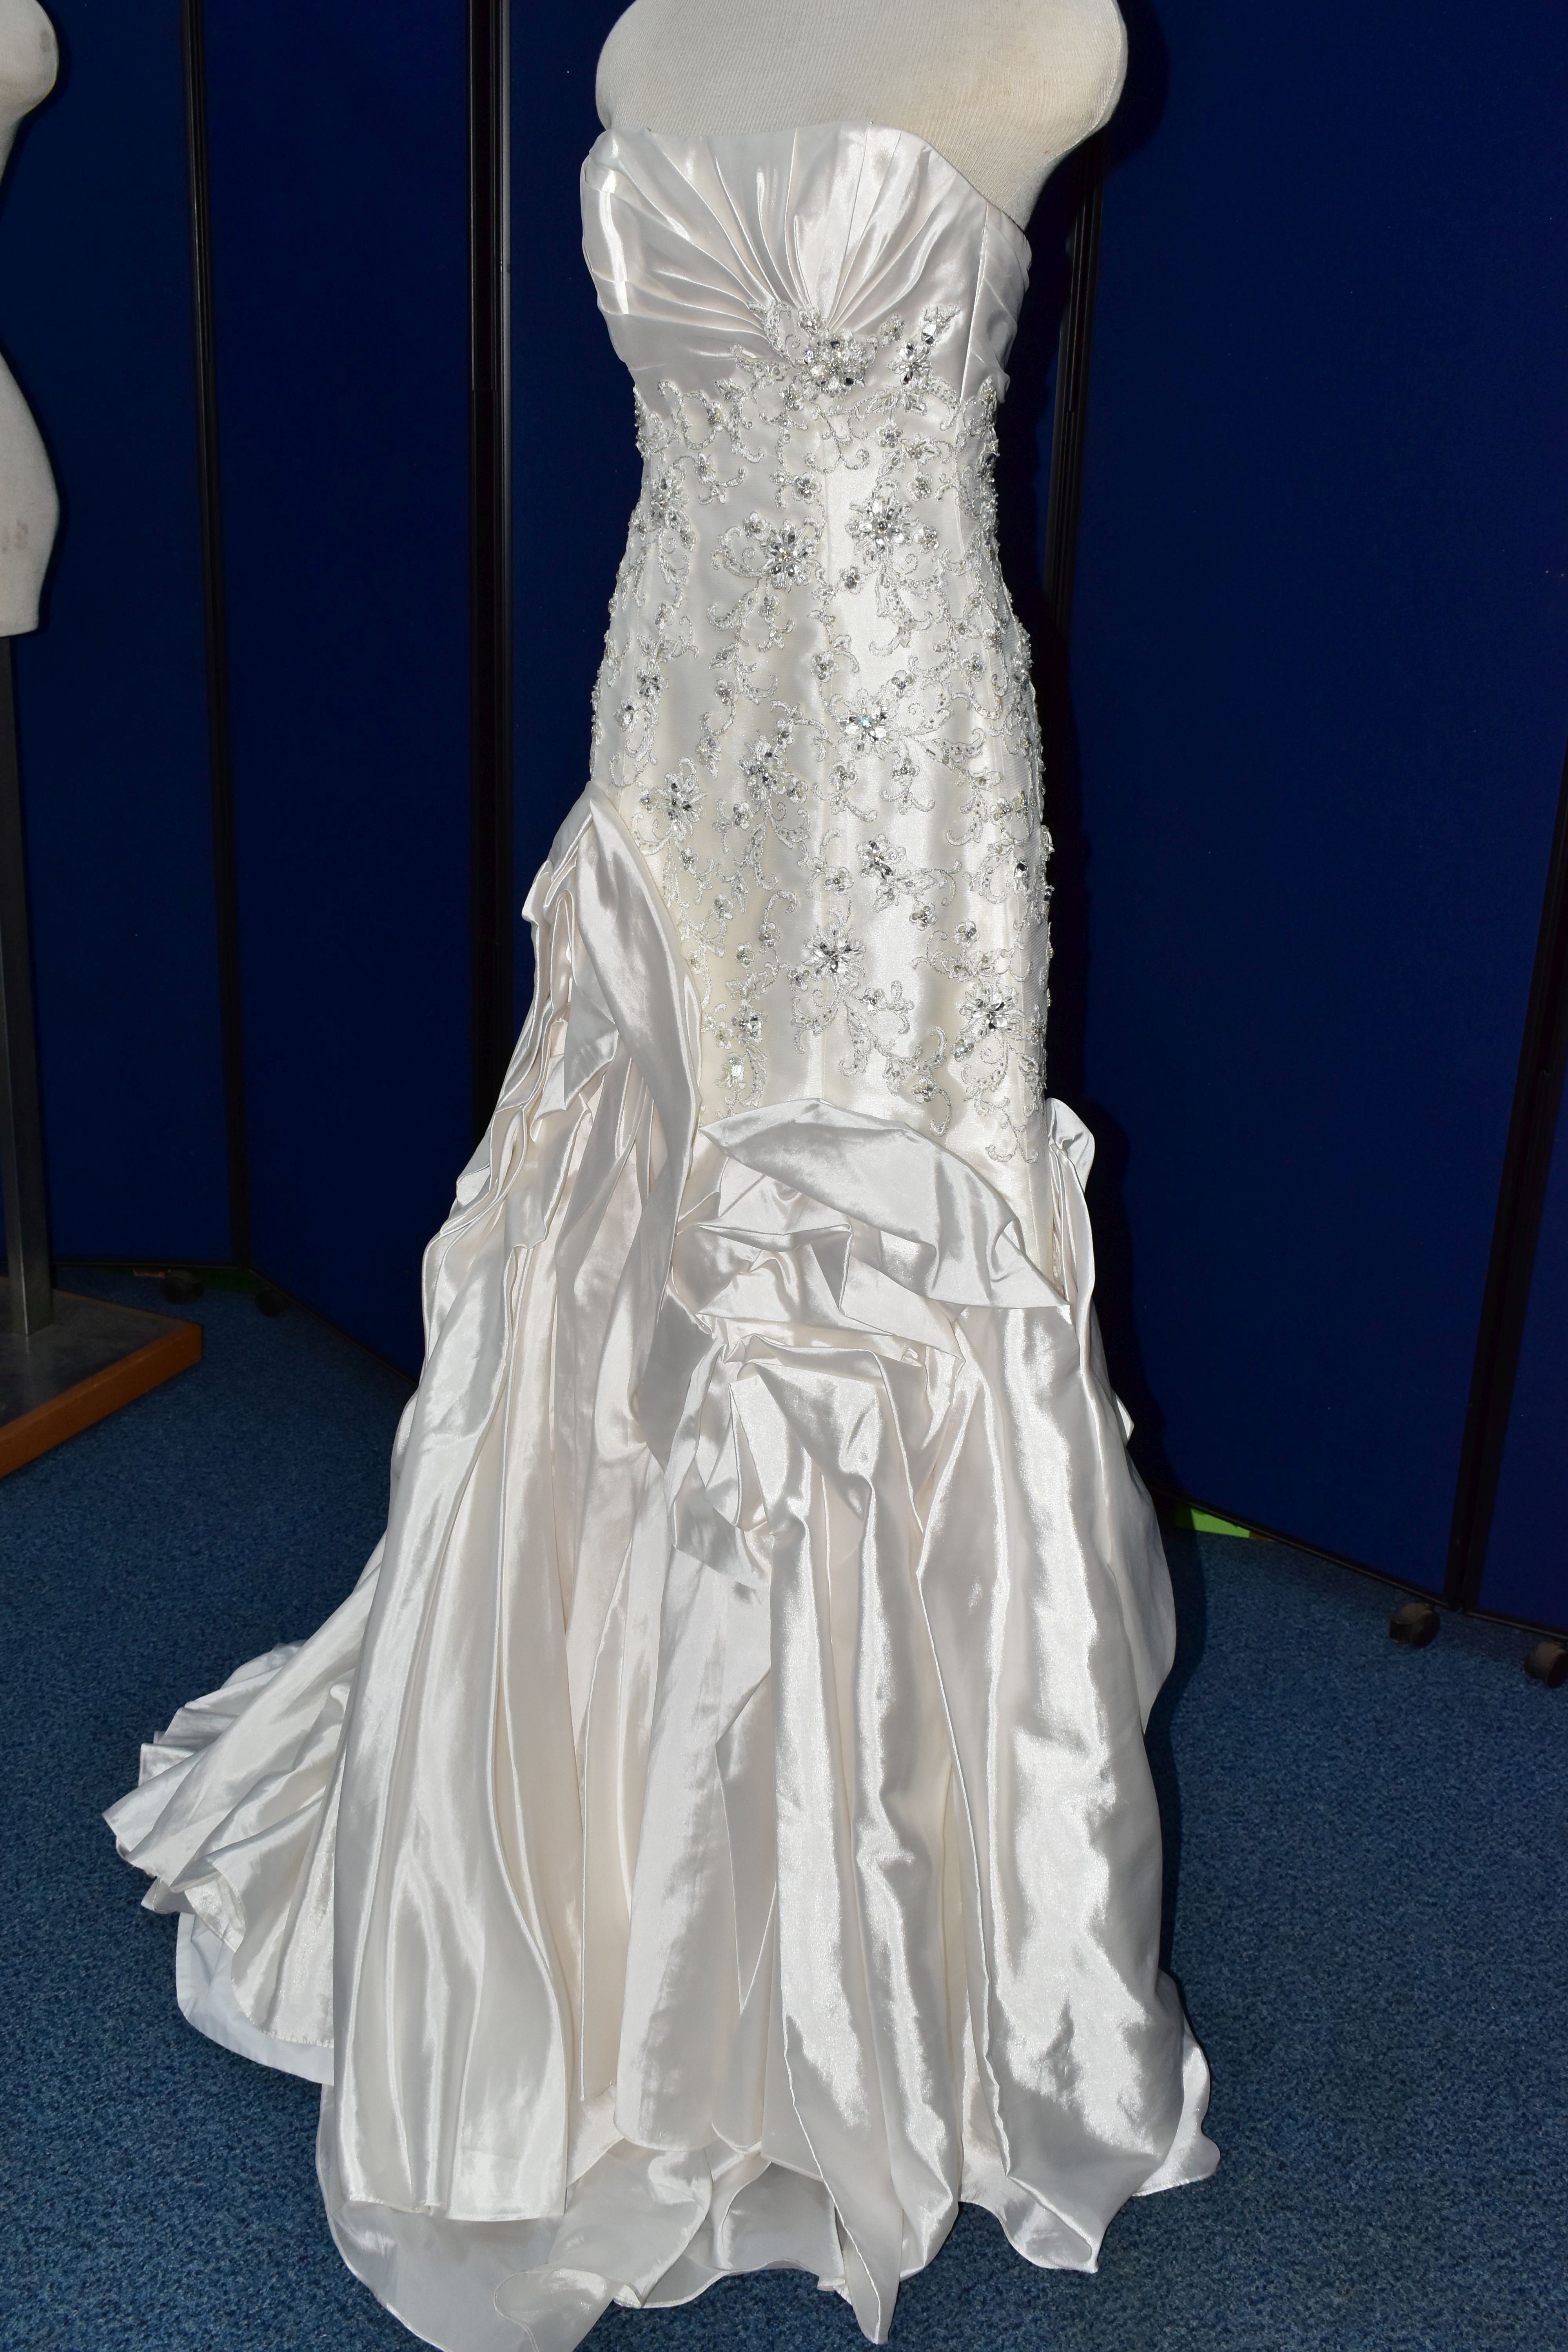 WEDDING GOWN, 'Sophia Tolli', size 10, champagne with satin bodice, pewter beaded appliques (1) - Image 8 of 13